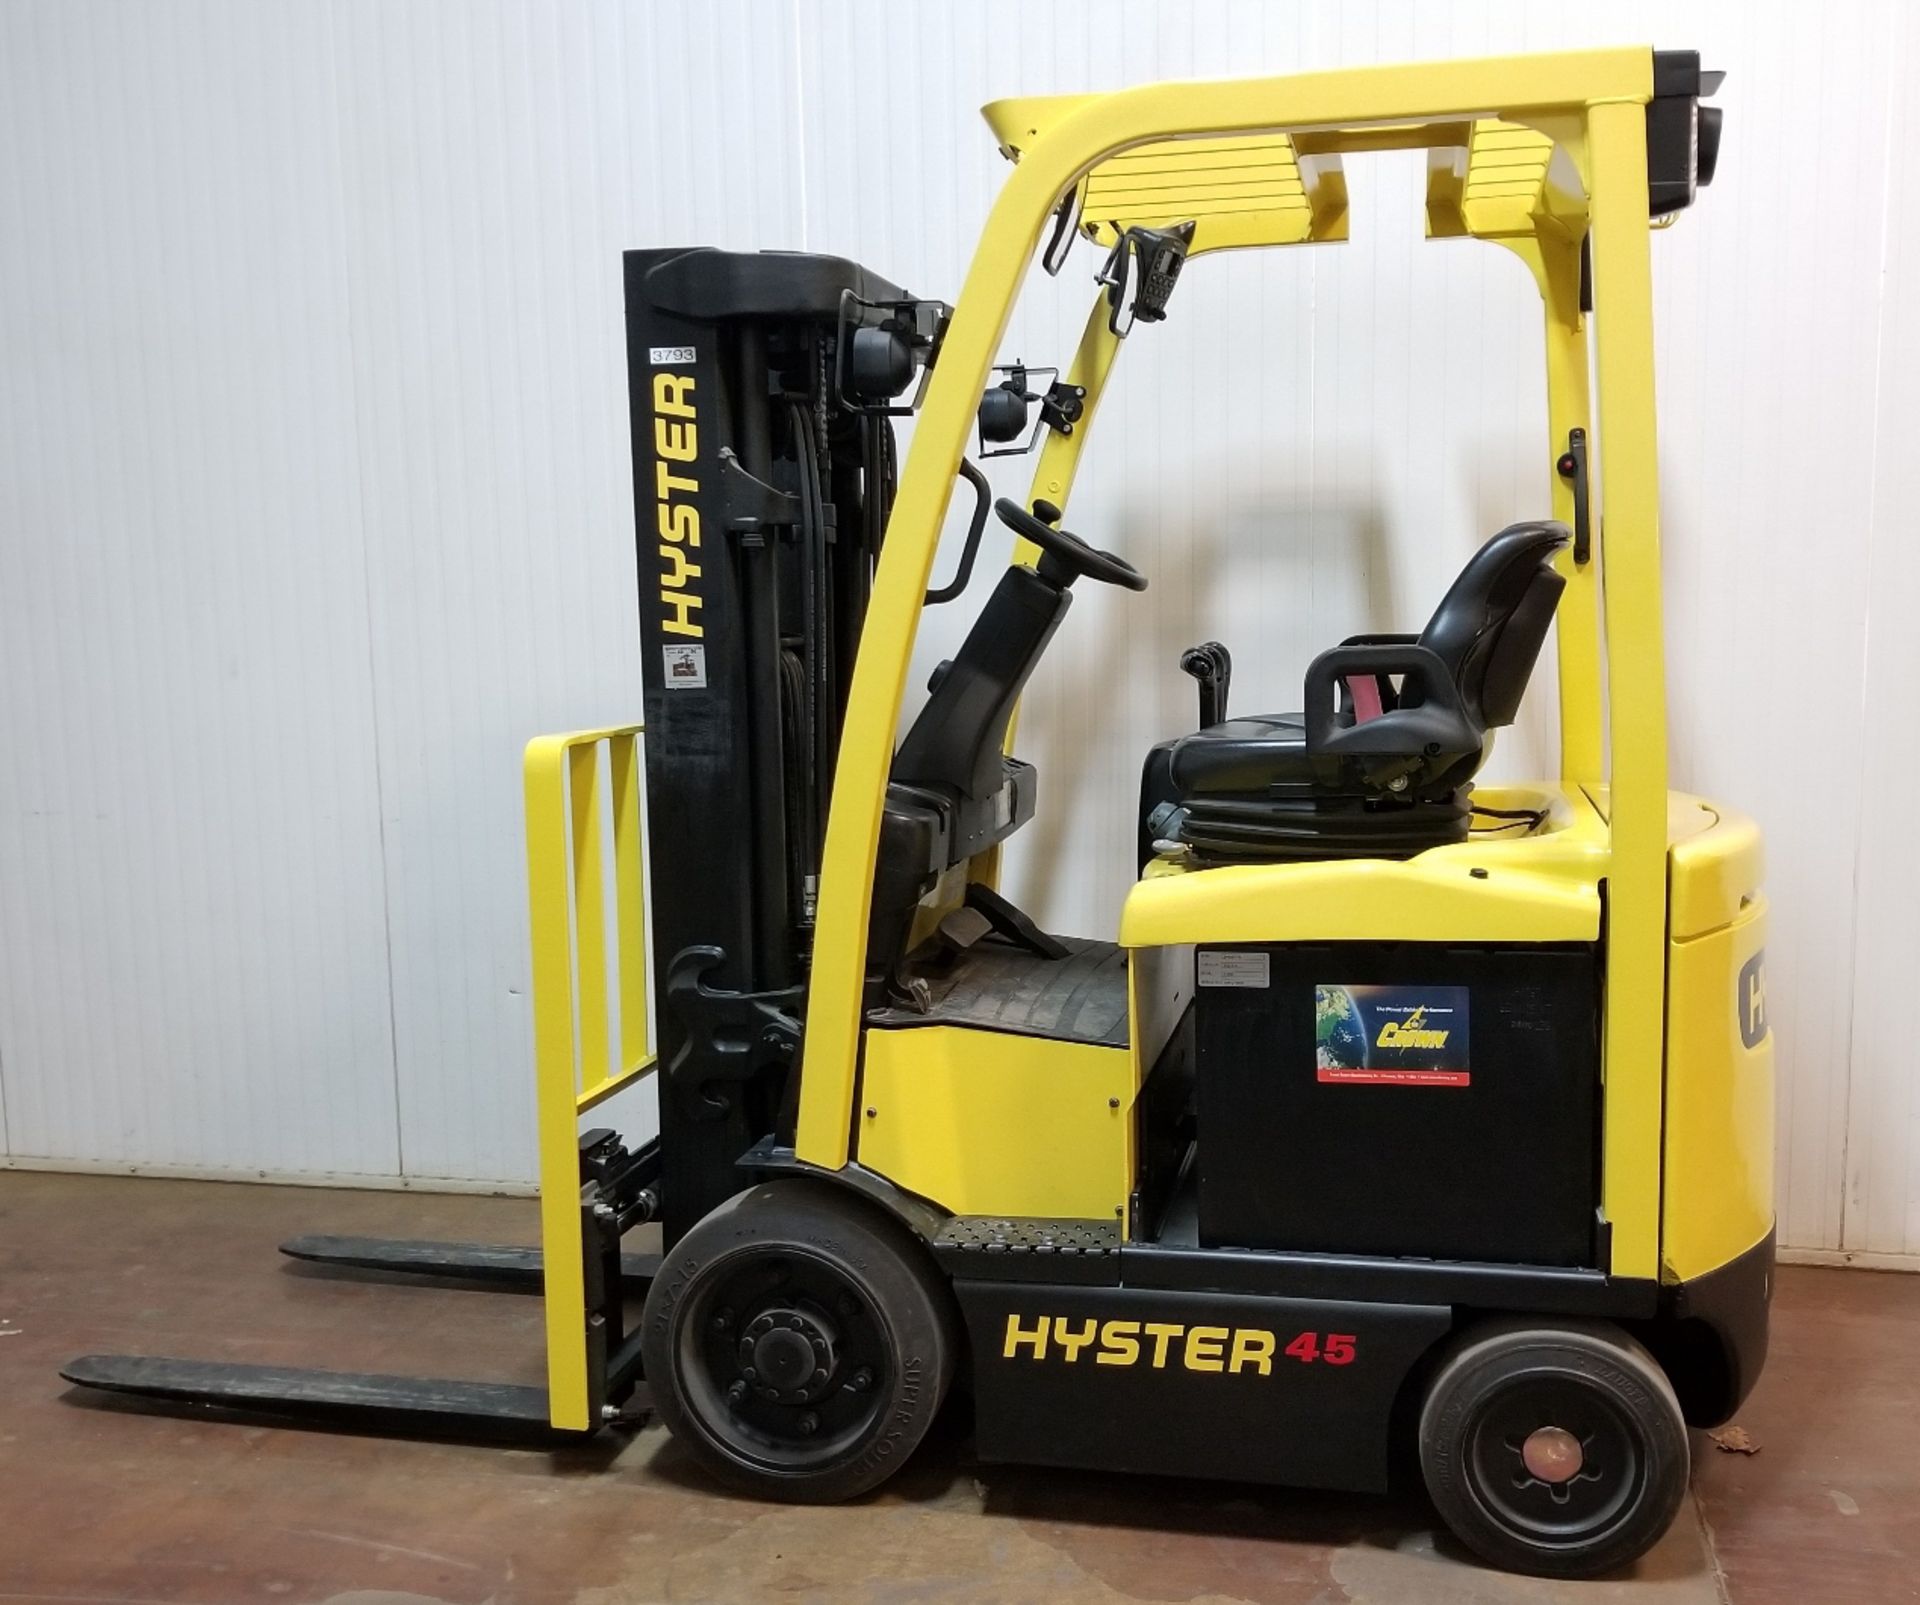 HYSTER (2017) E45XN 4,500 LB. CAPACITY 48V ELECTRIC FORKLIFT WITH 189" MAX. LIFT HEIGHT, SIDE SHIFT - Image 2 of 3